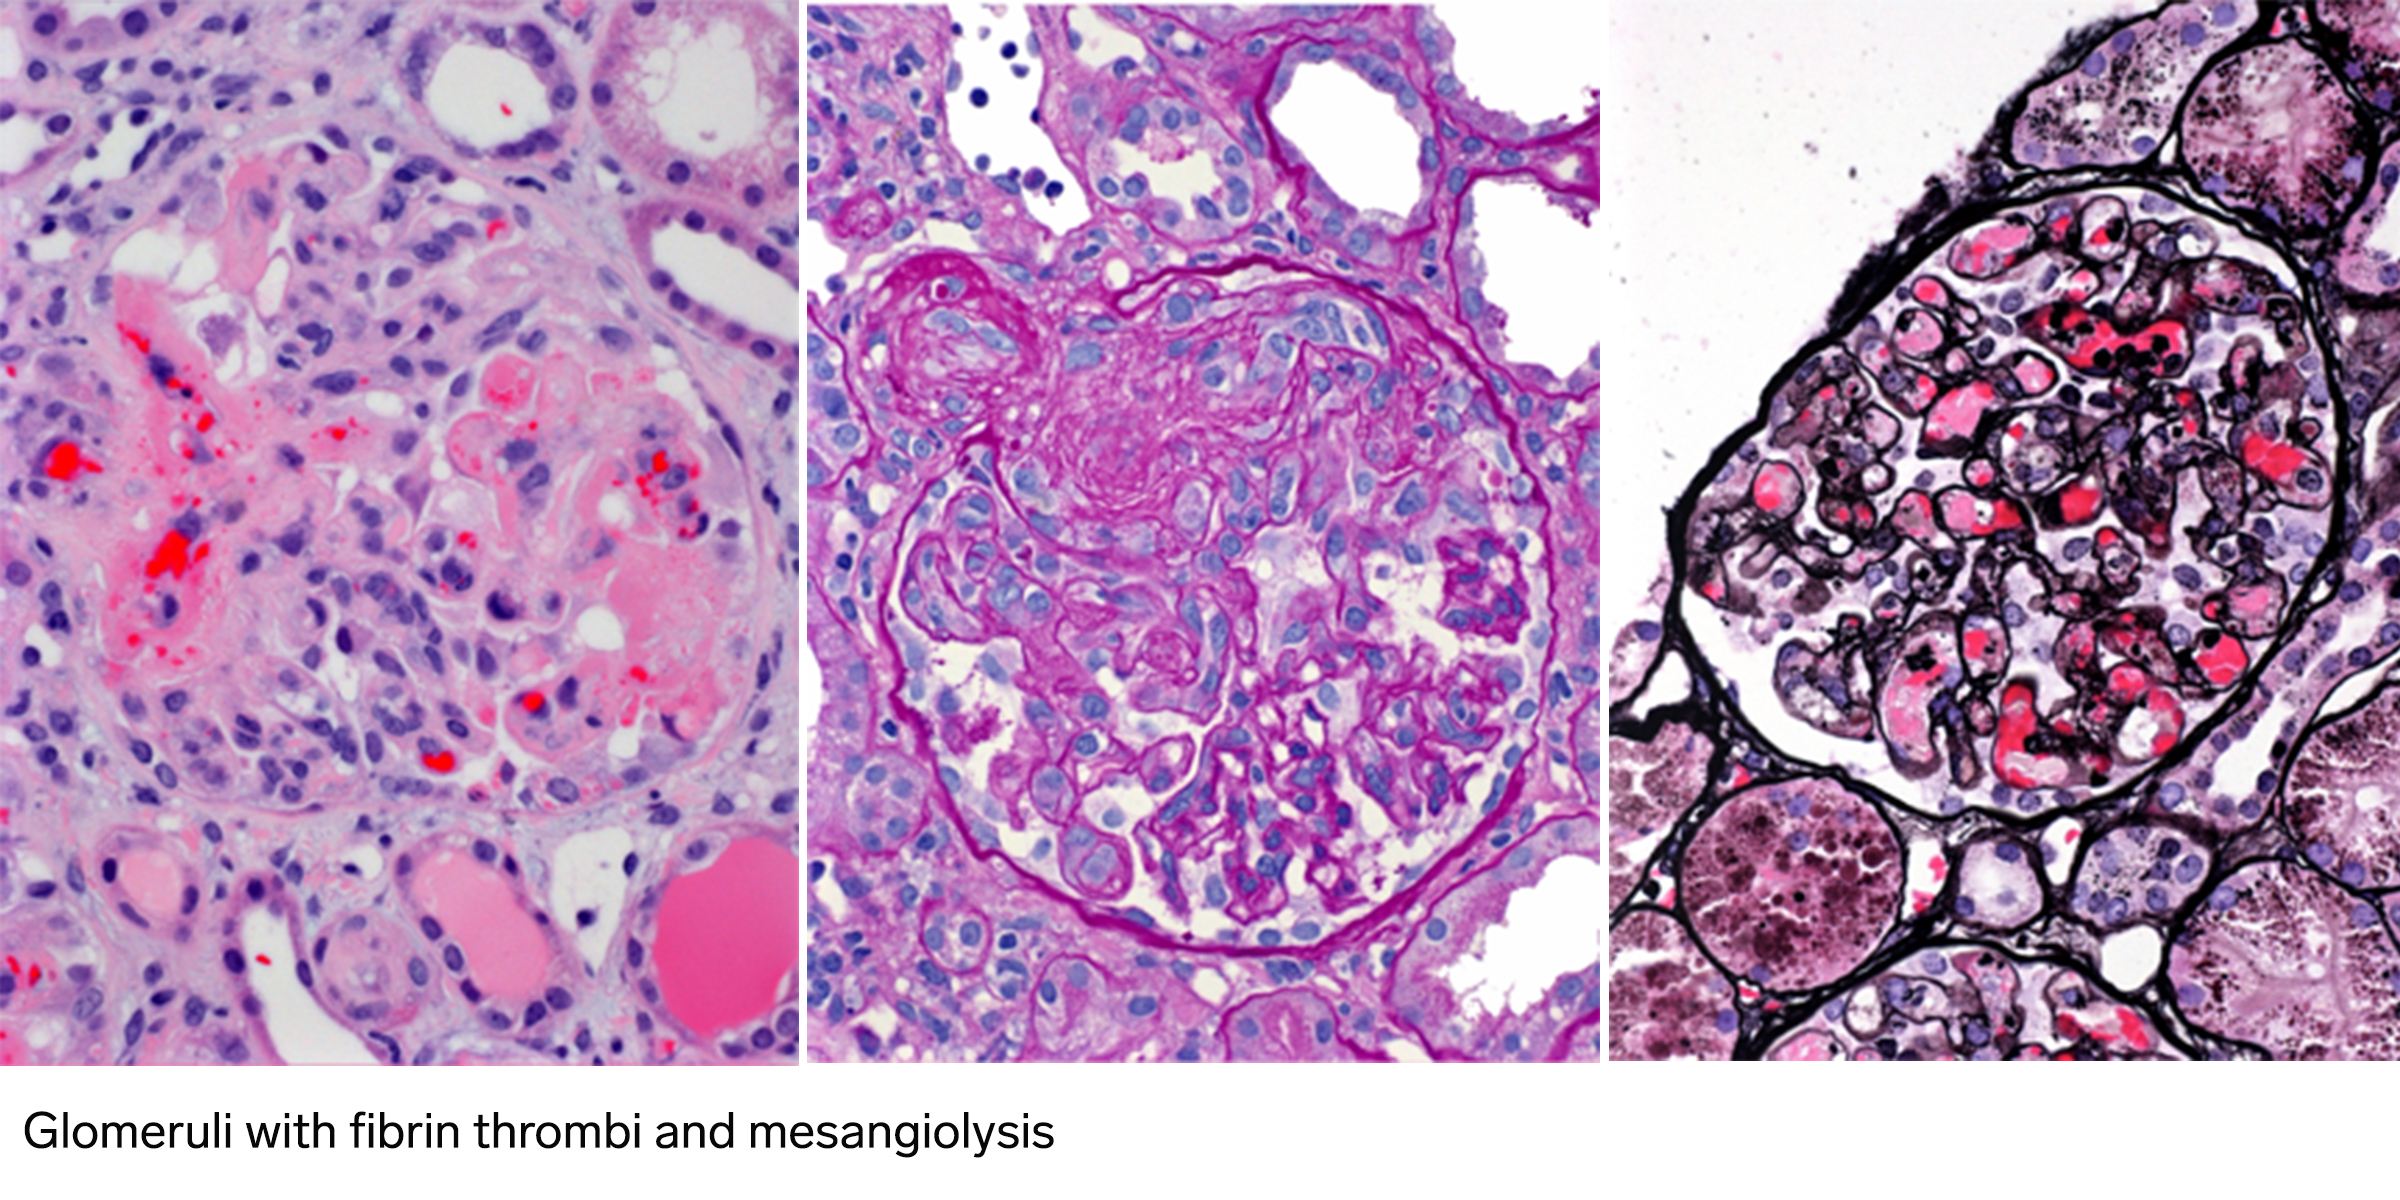 Thrombotic Microangiopathy Sequencing Panel, TMA, renal biopsy